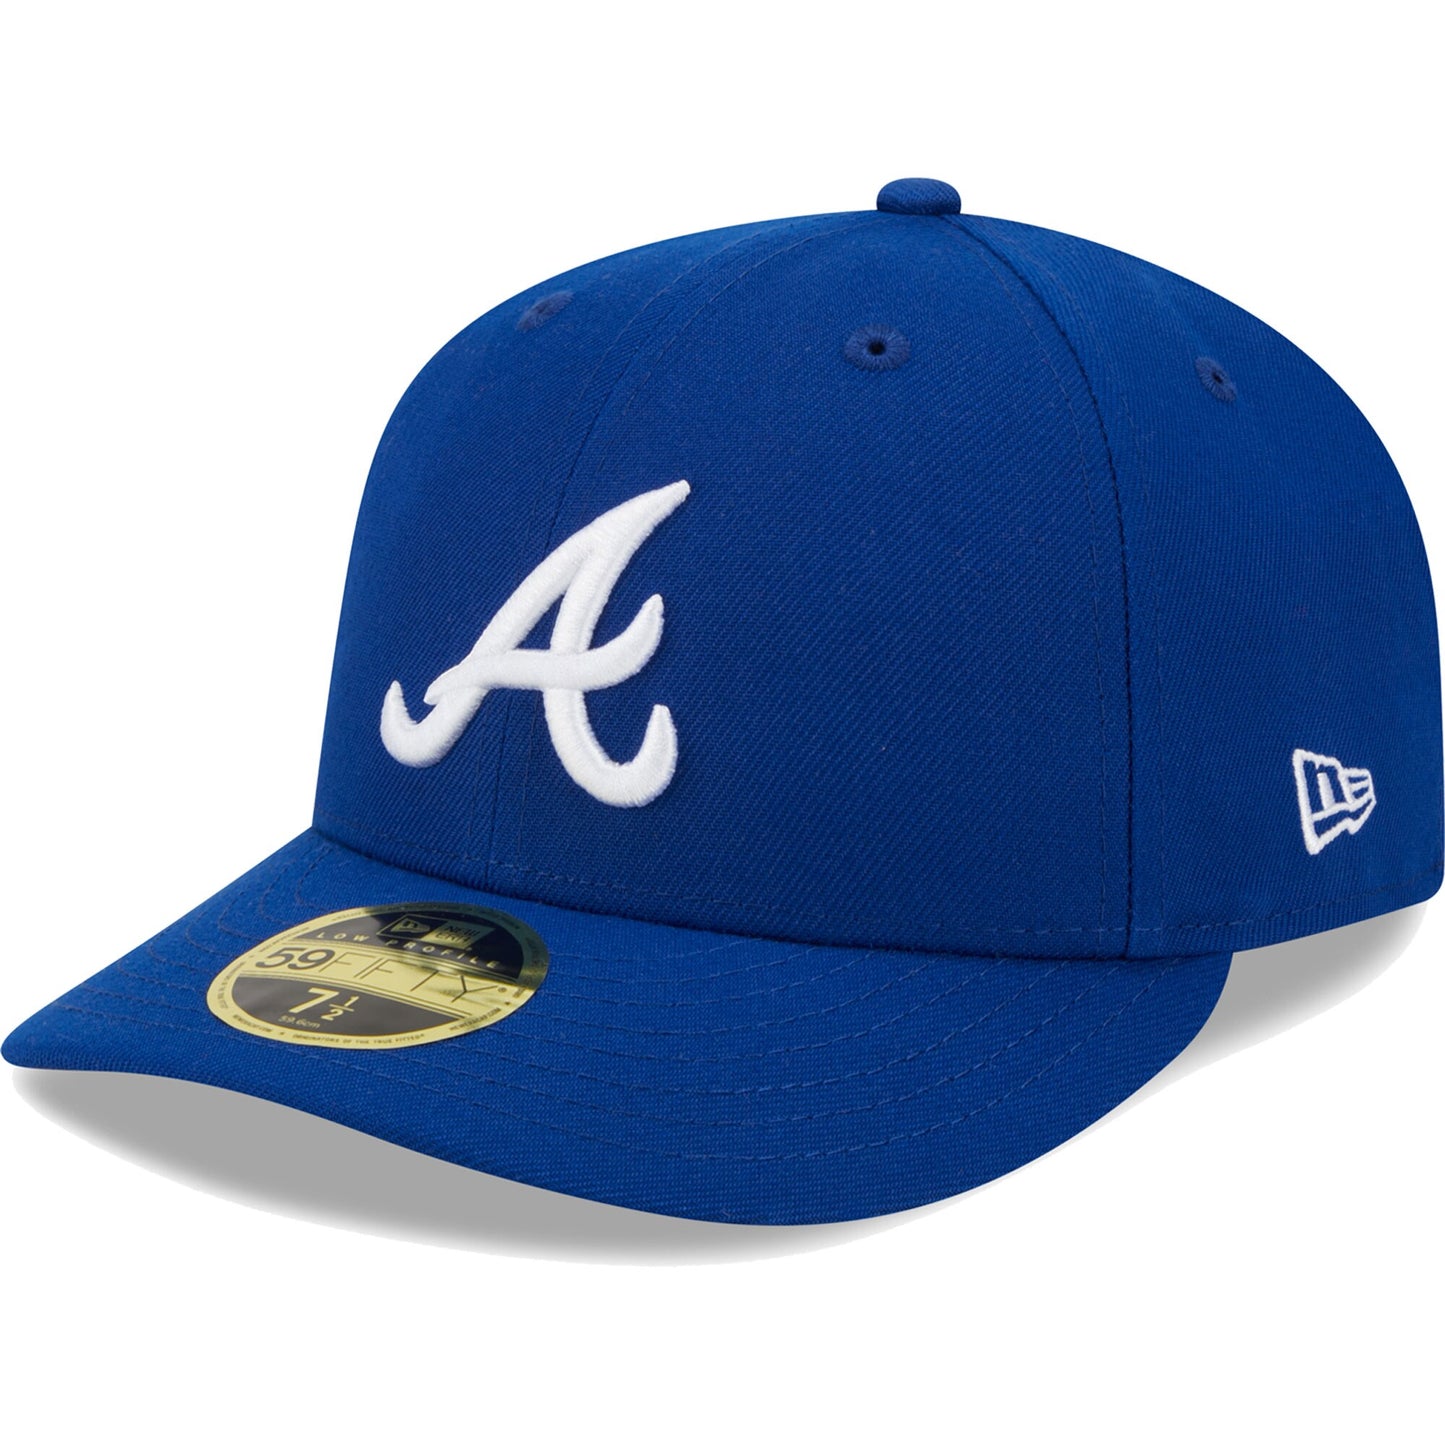 Atlanta Braves New Era White Logo?Low Profile 59FIFTY Fitted Hat - Royal